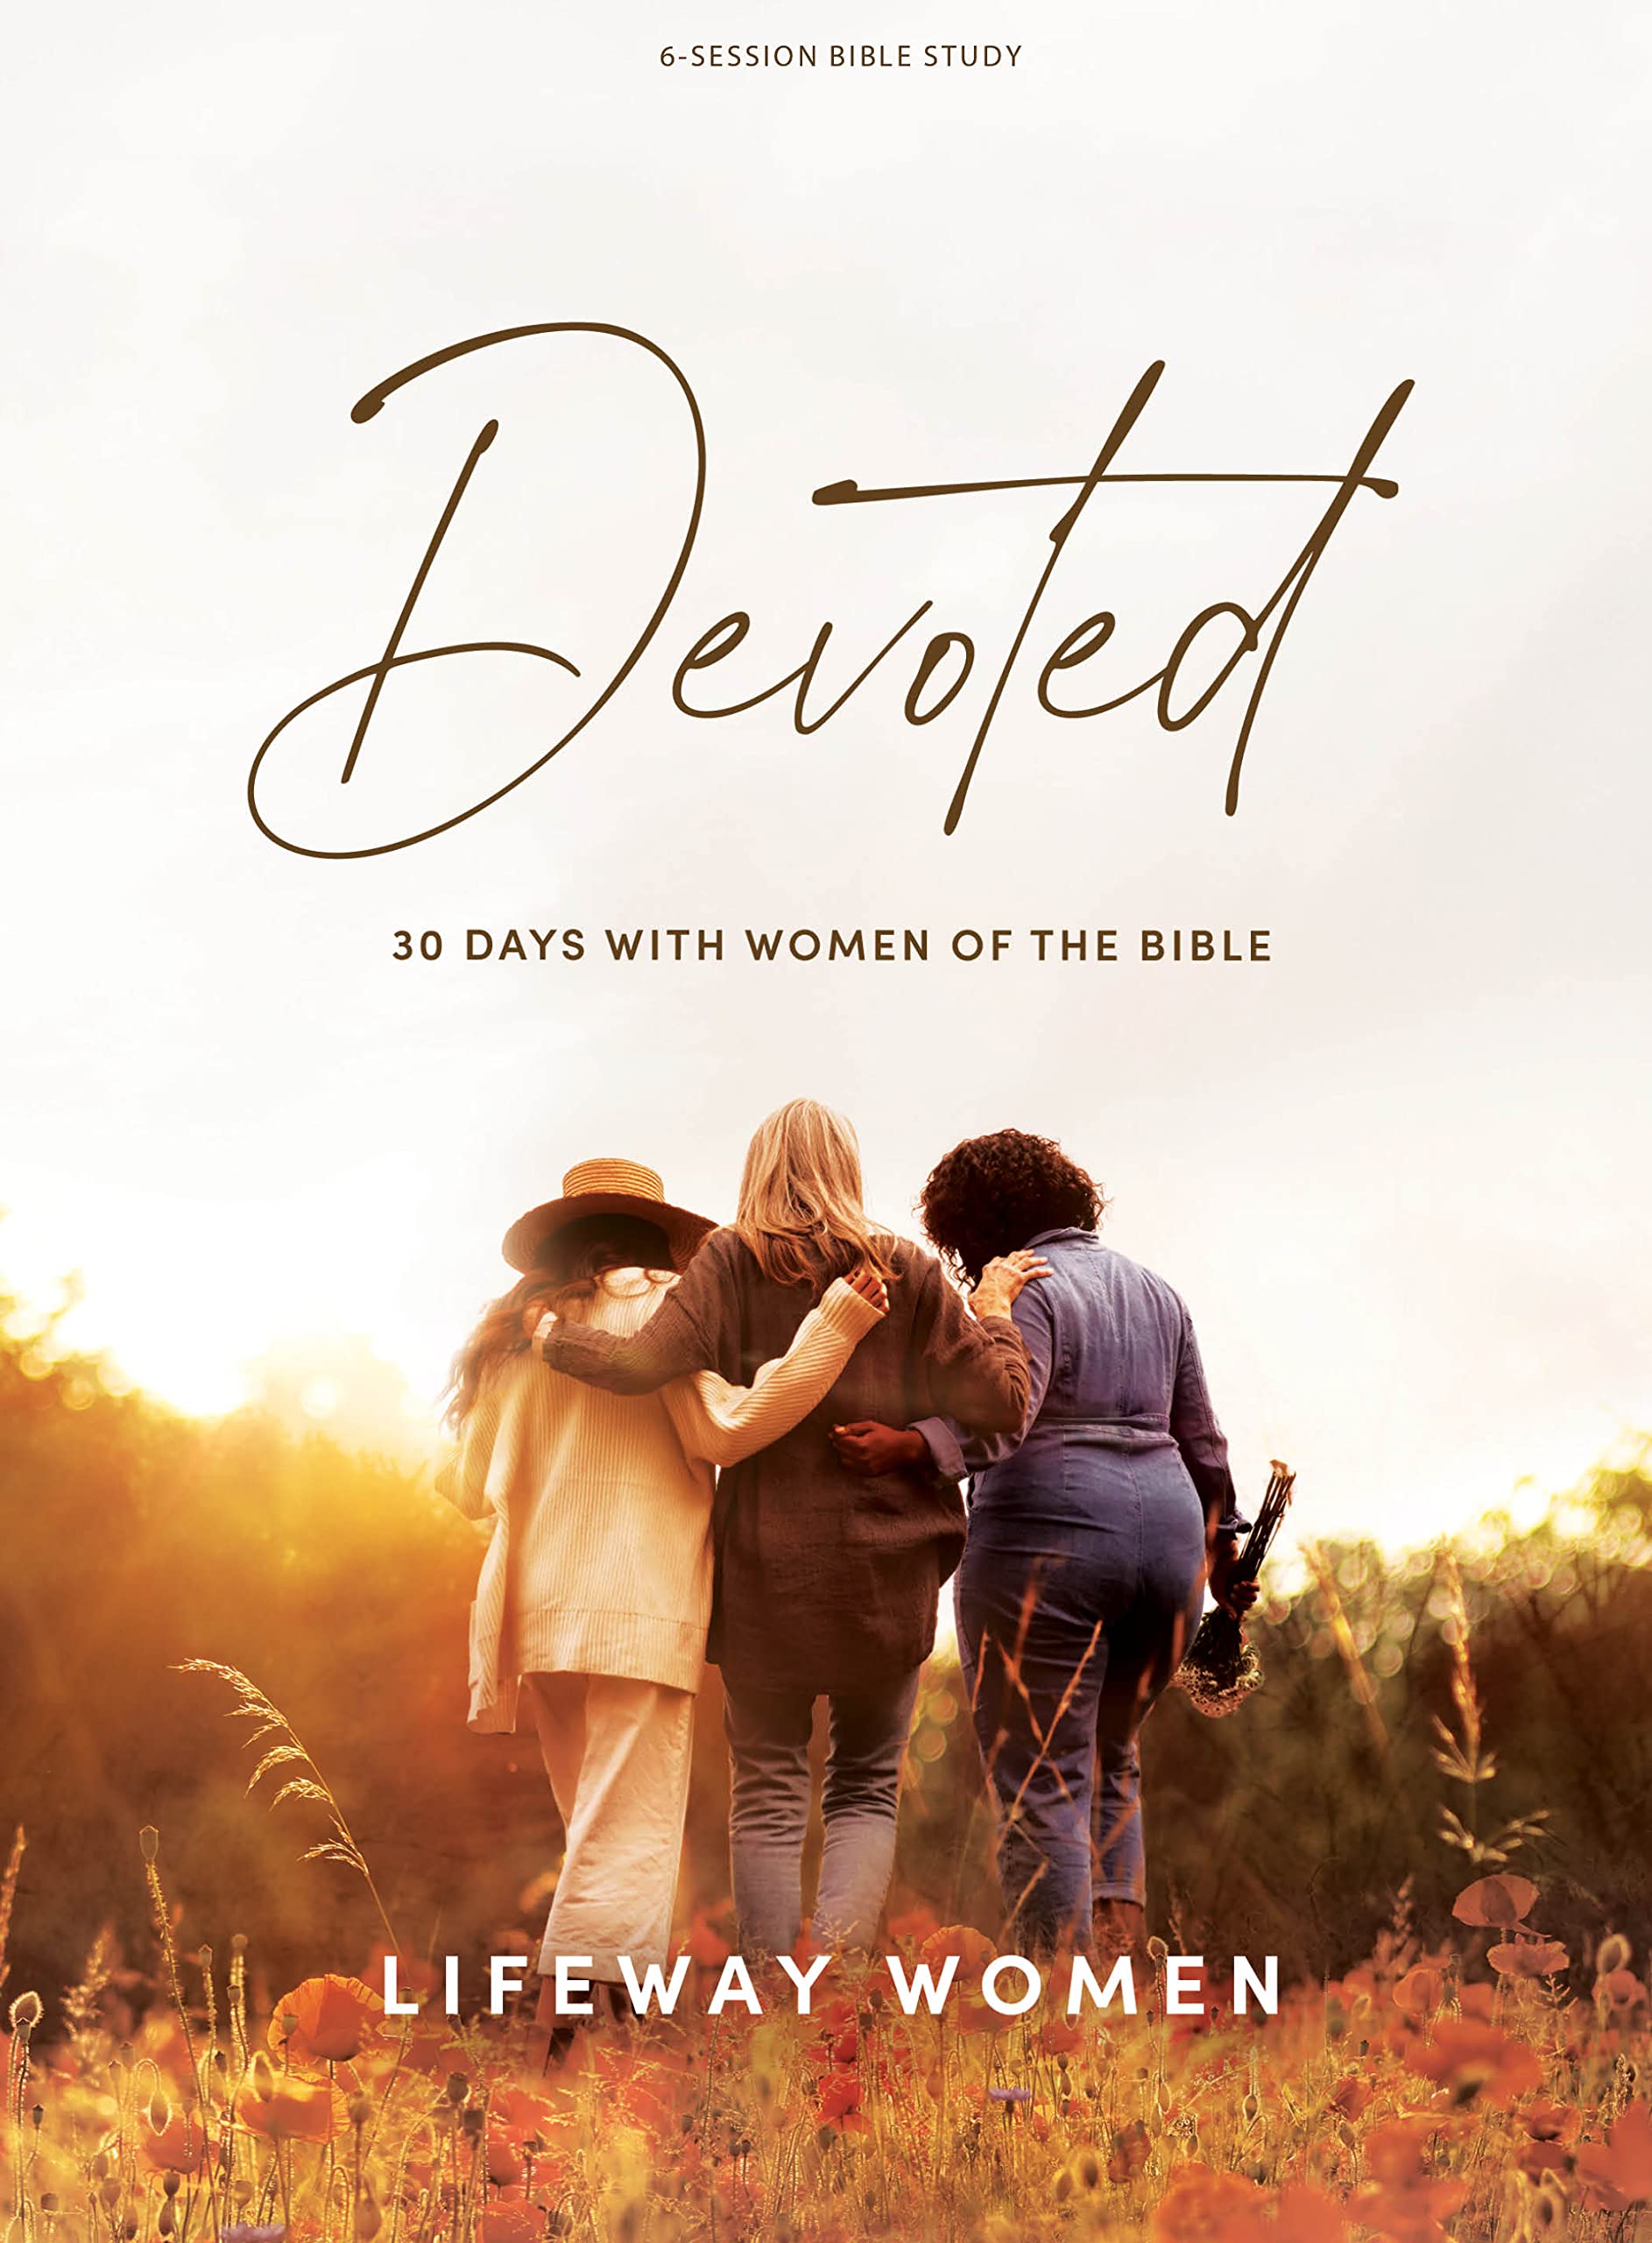 Devoted: 30 Days with Women of the Bible - Devotional Bible Study for Women